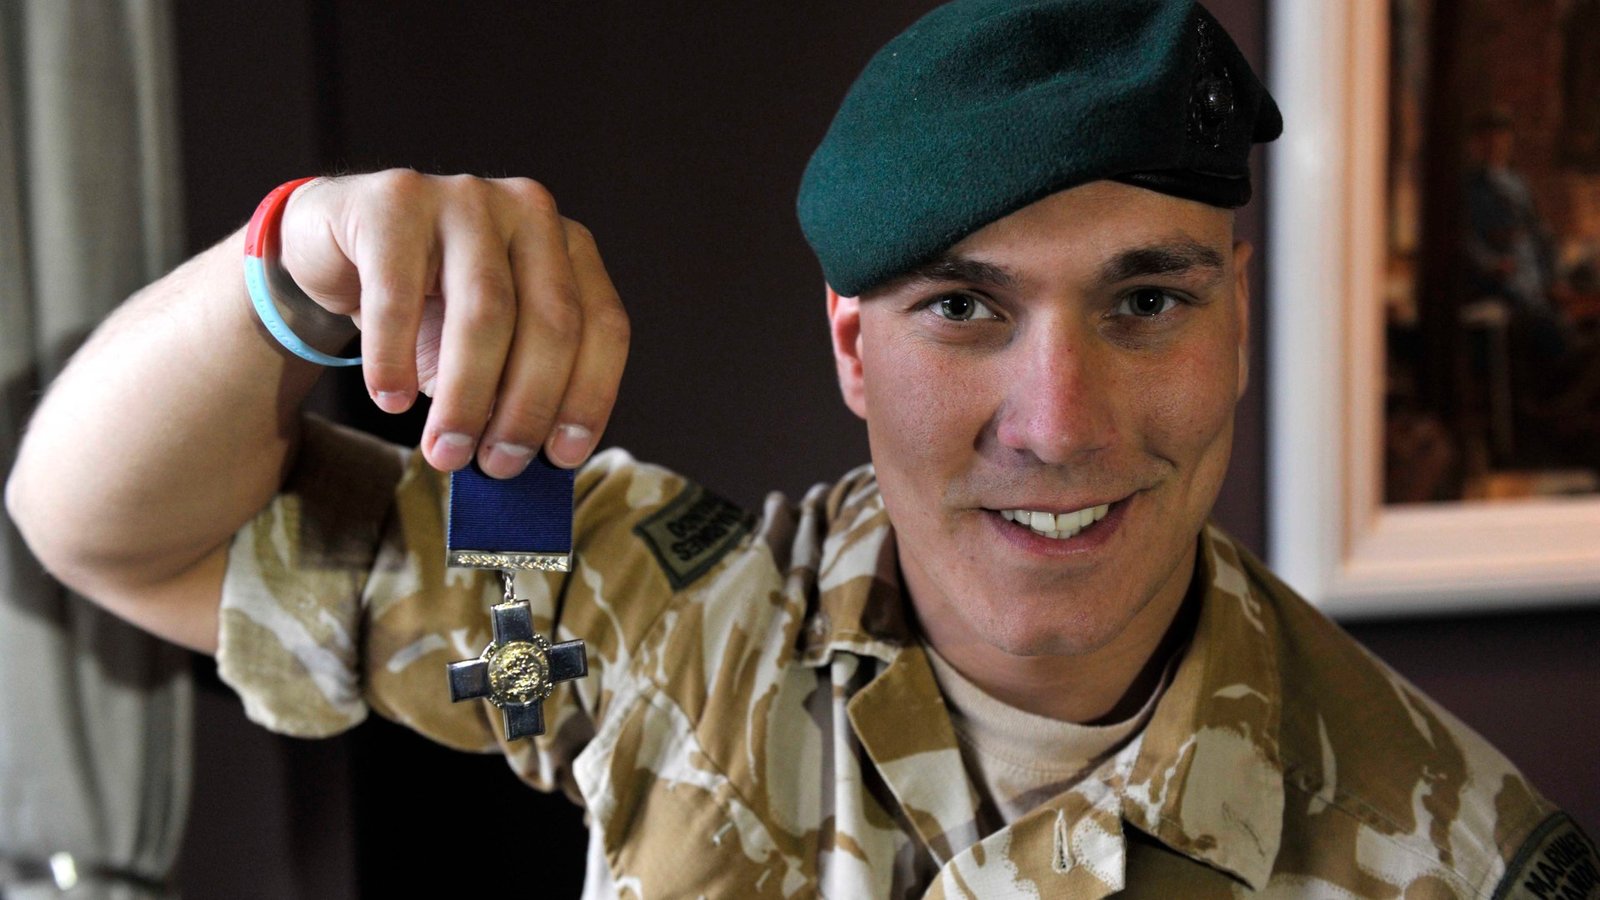 Decorated Royal Marine hero who saved comrades’ lives in Afghanistan arrested & held in Dubai for 7 months for ‘spying’